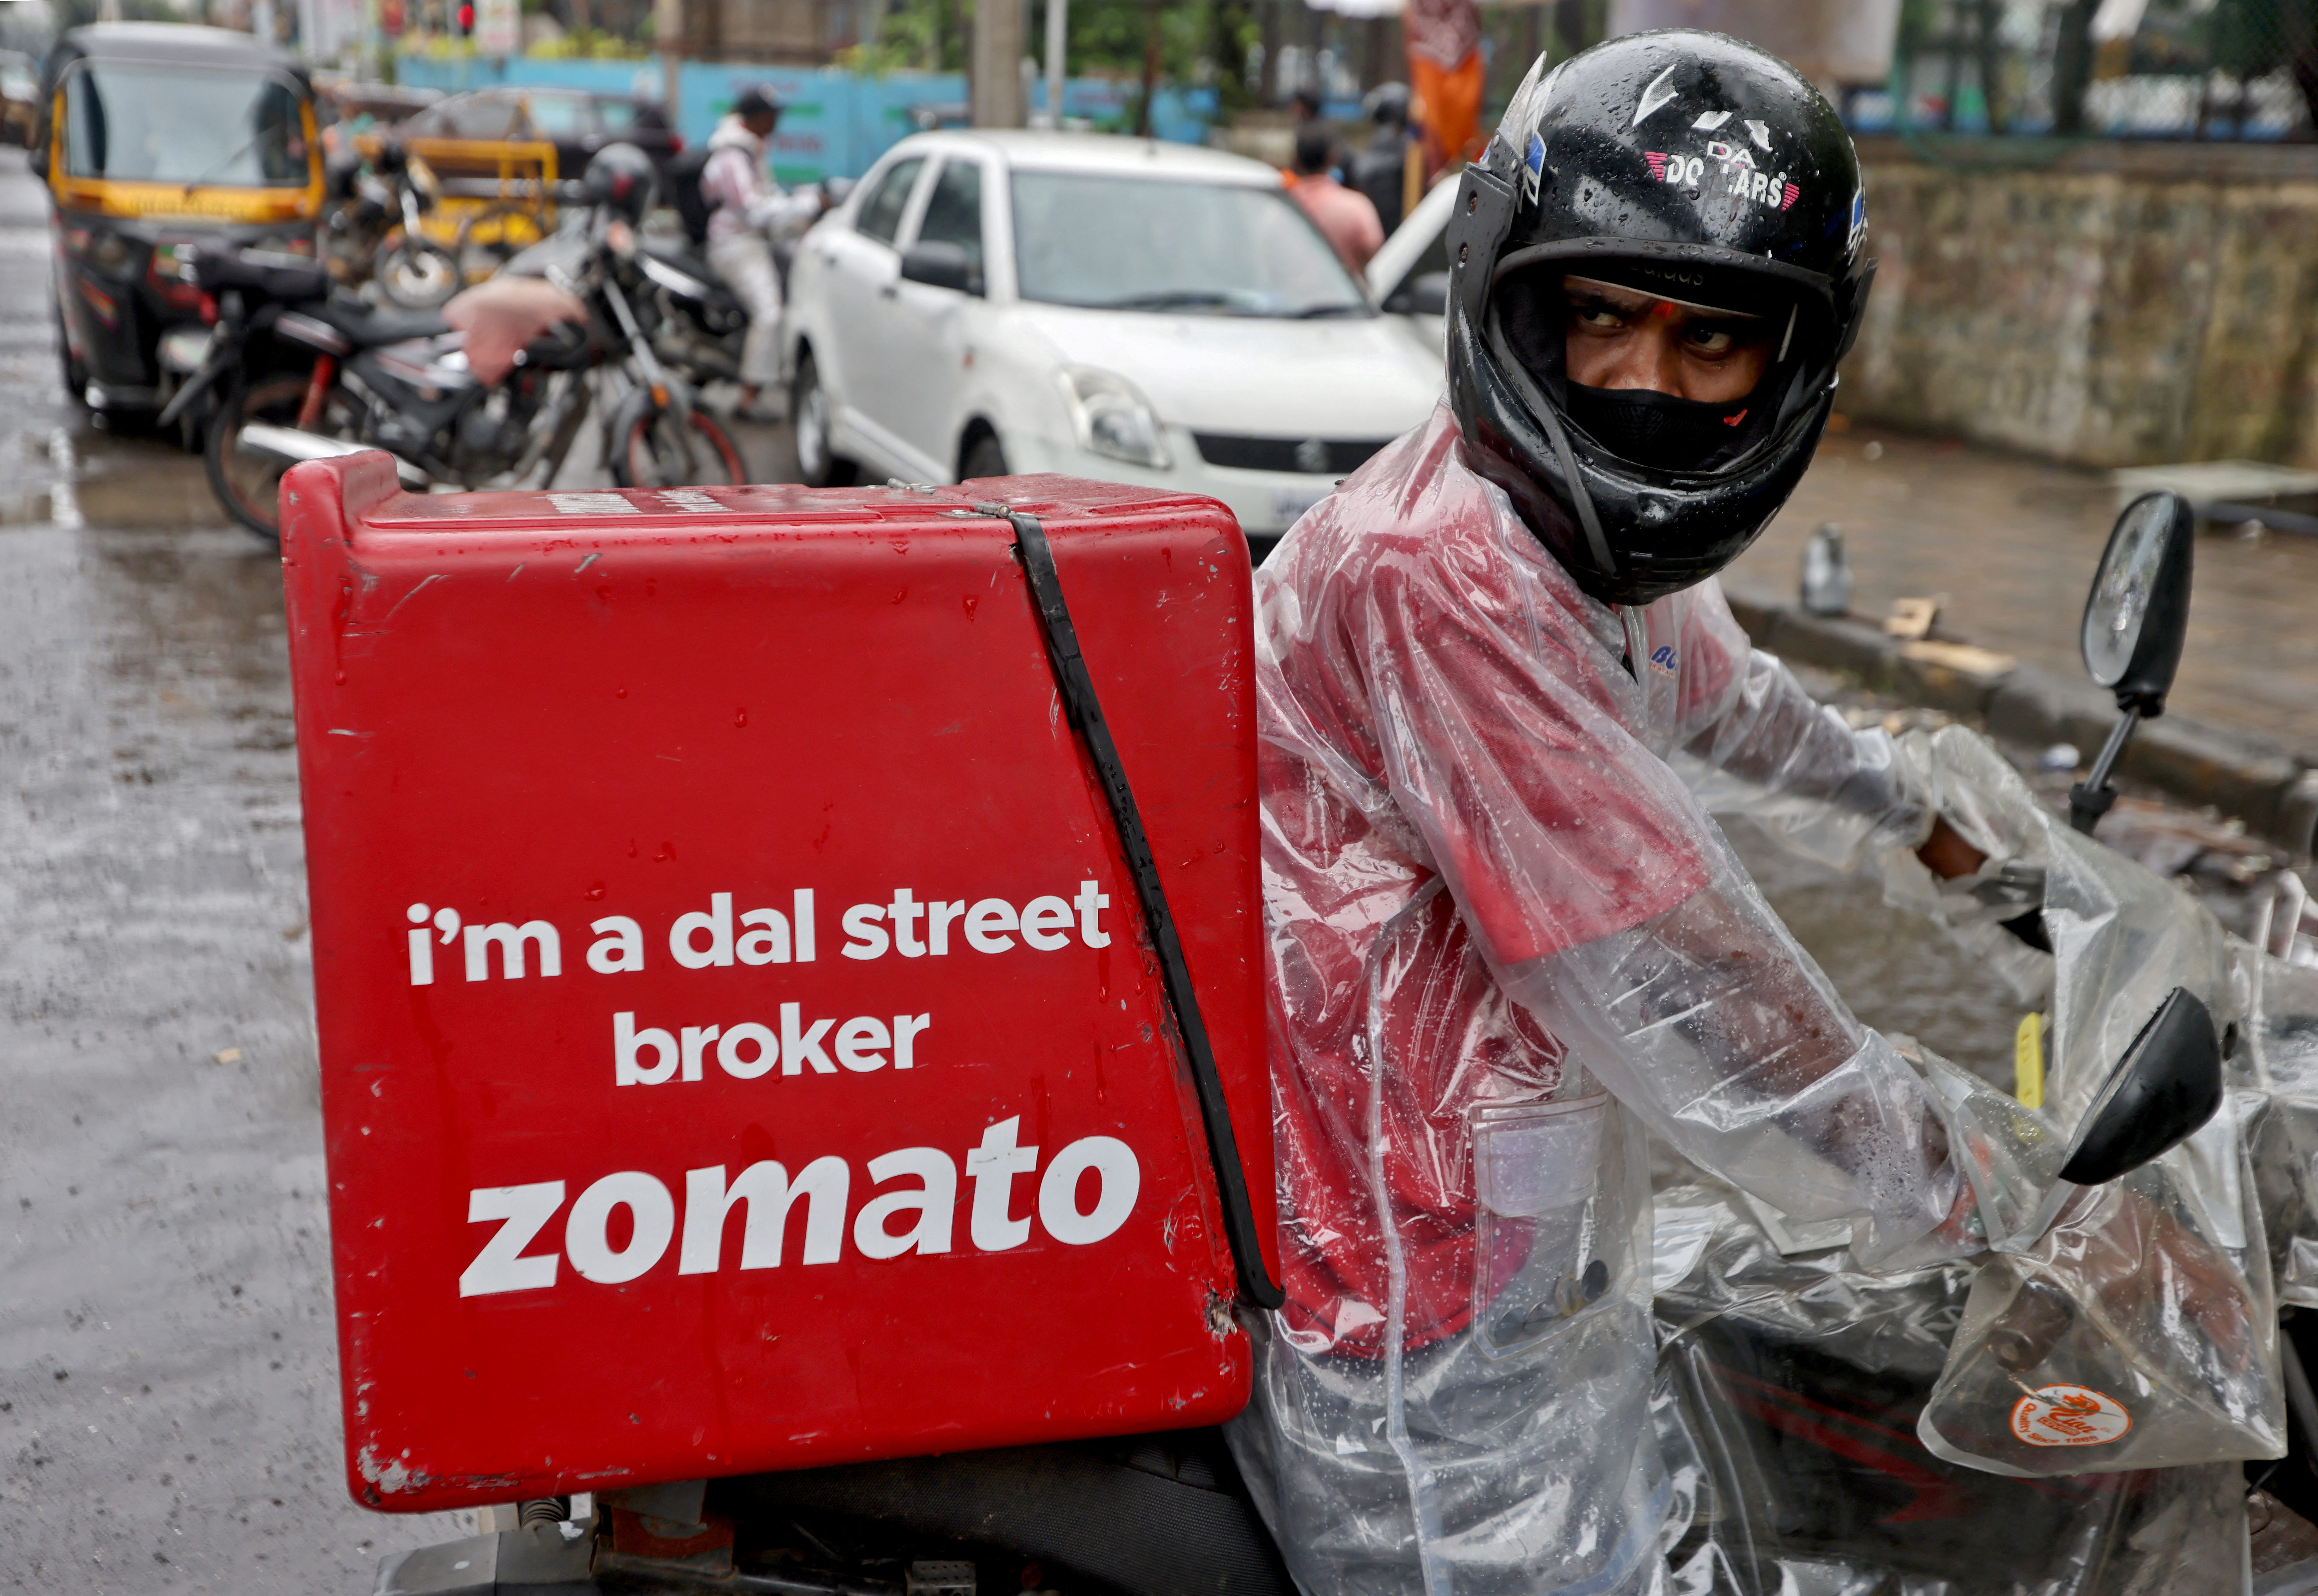 Global firms, Singapore govt rush to buy Alipay's stake in India's Zomato